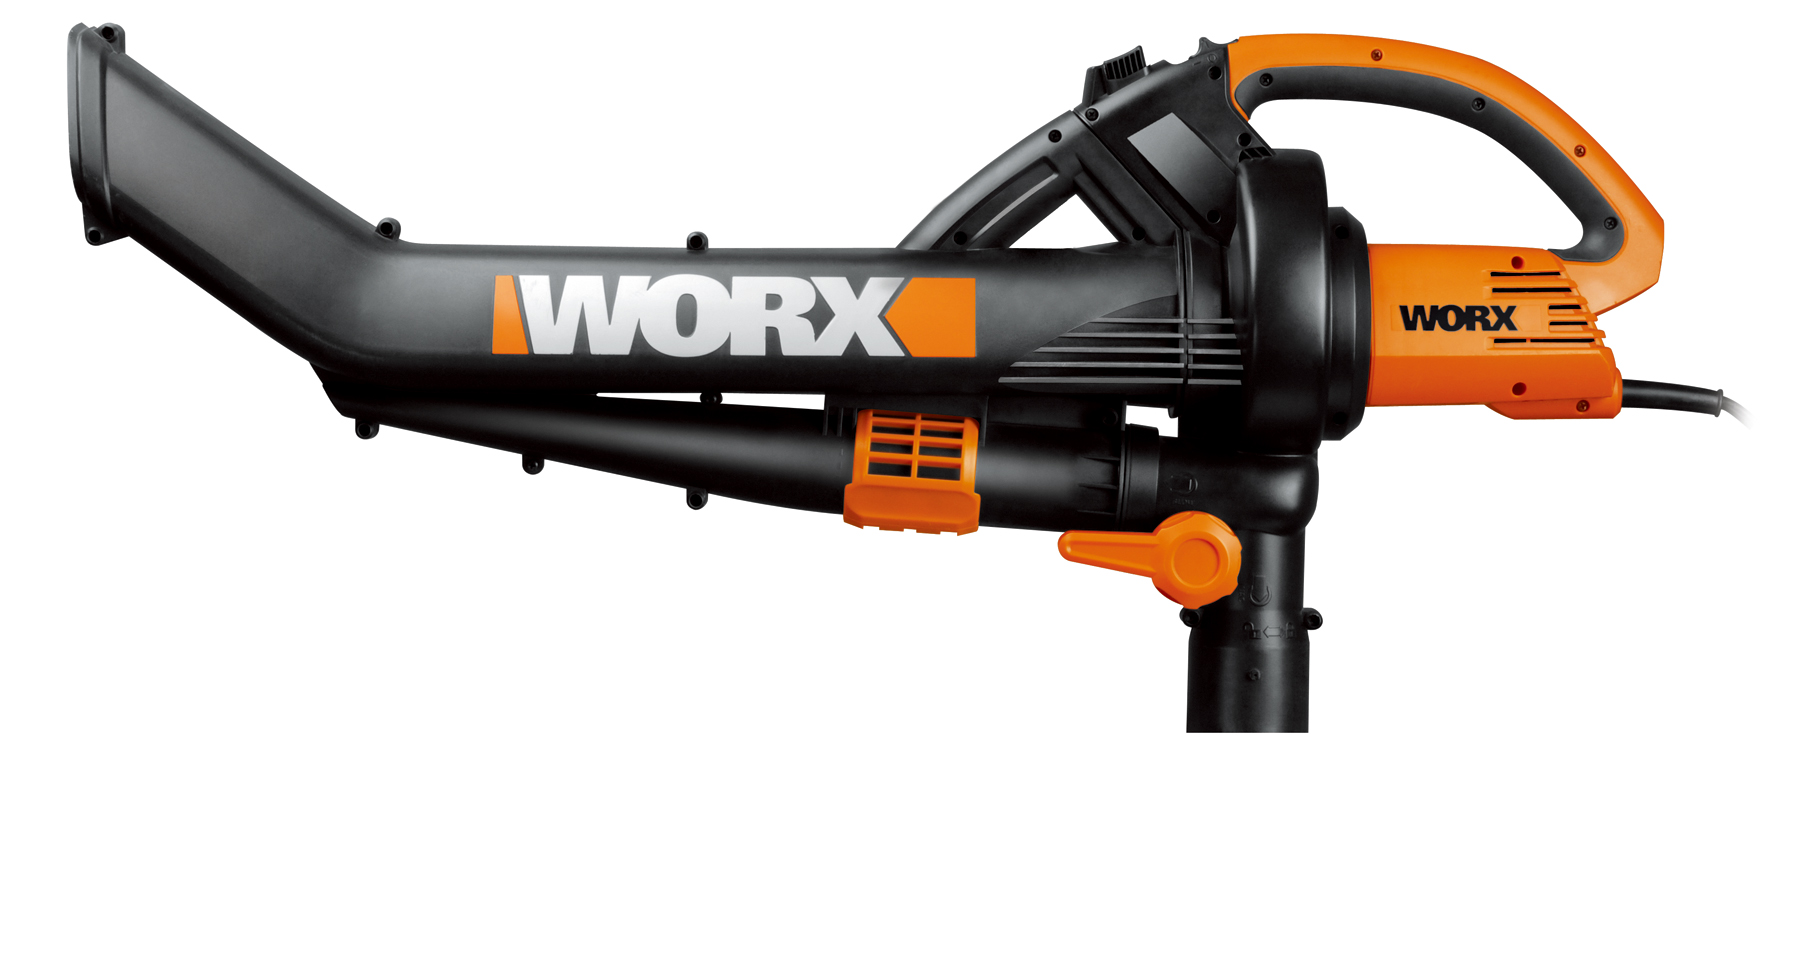 WORX TRIVAC with two-stage impeller system is ideal for yard cleanup.